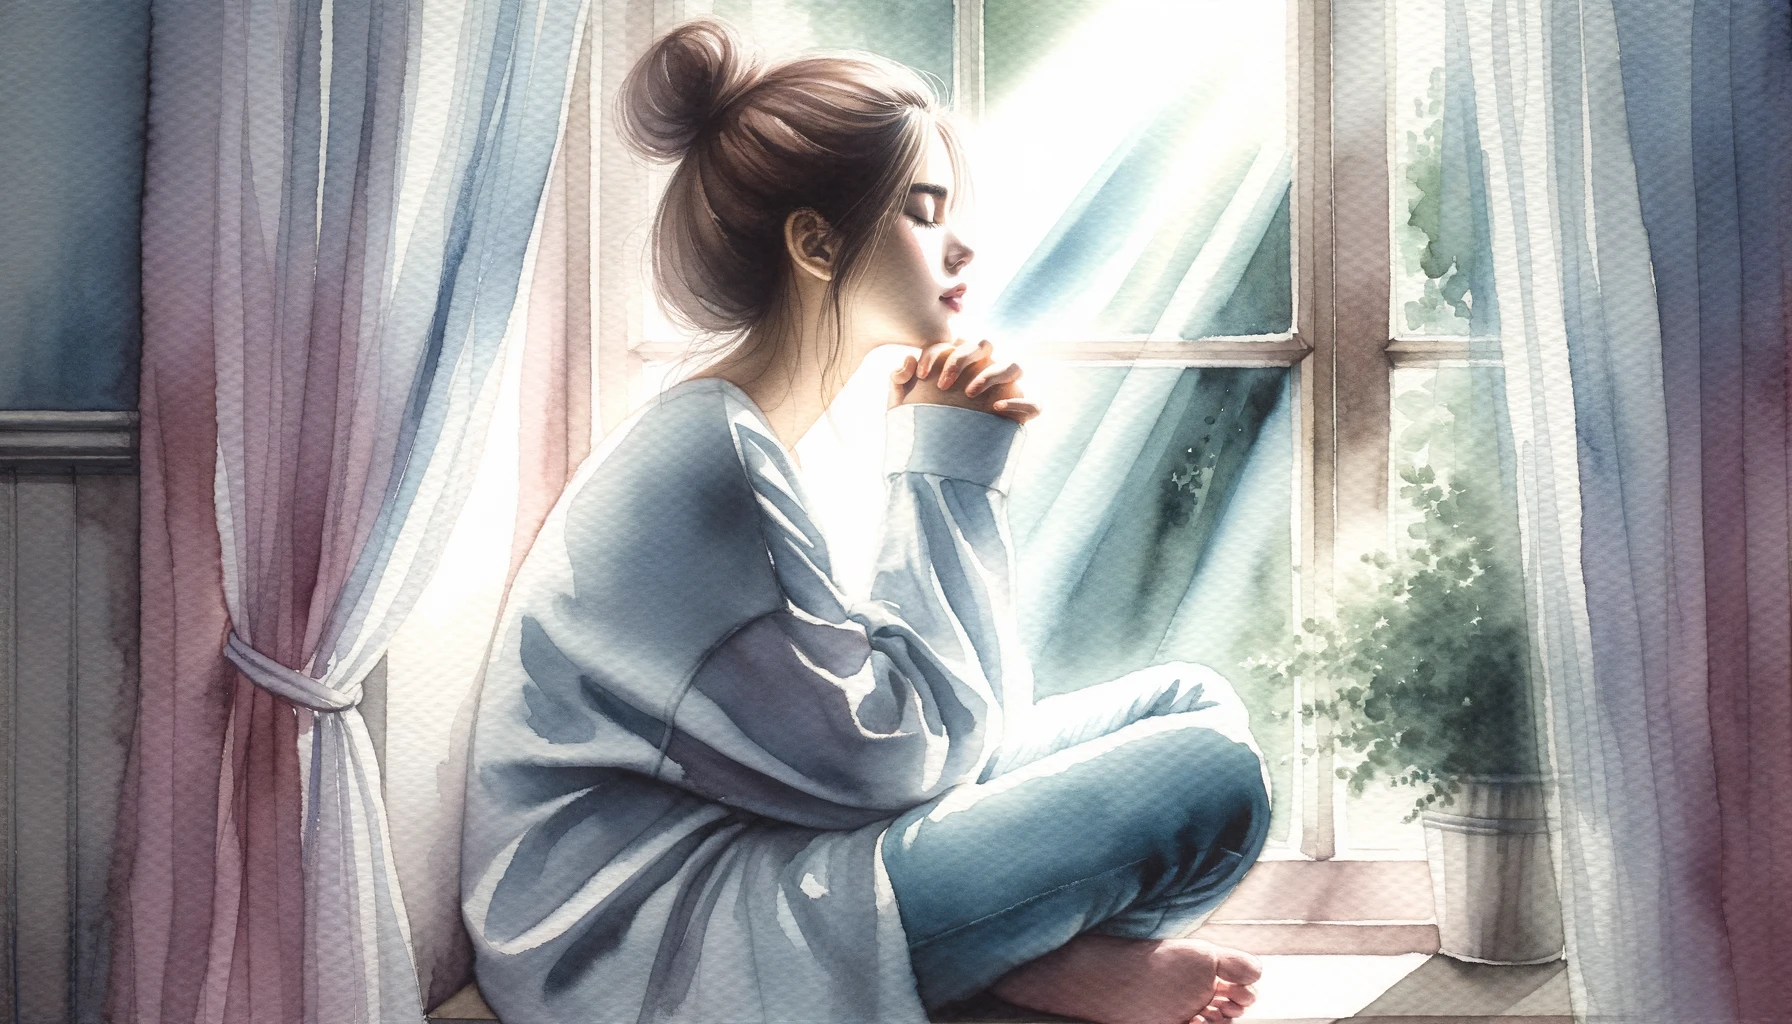 Young woman sitting by a window, sunlight streaming in, with her eyes closed in deep prayer in Jesus’ name.